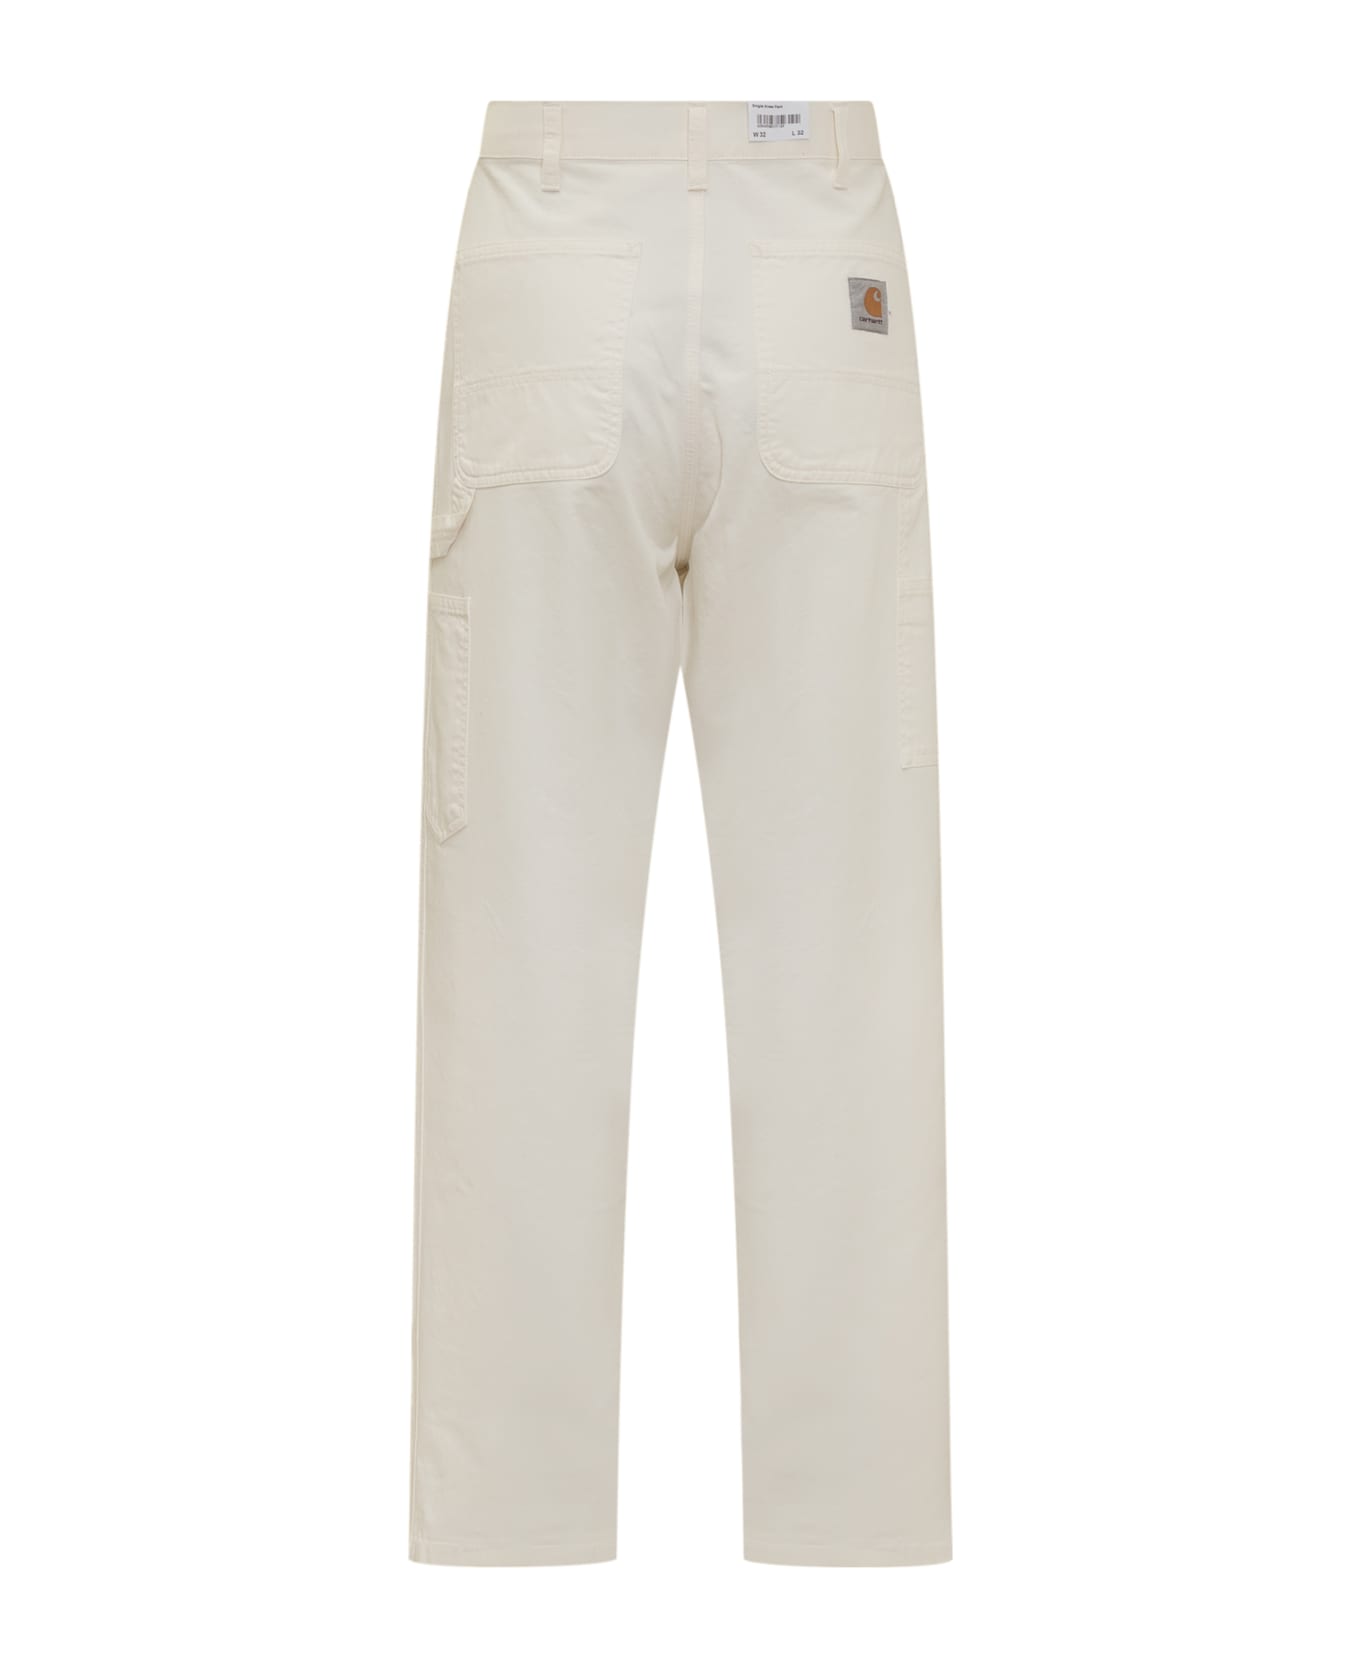 Carhartt Trousers - Off White Rinsed ボトムス